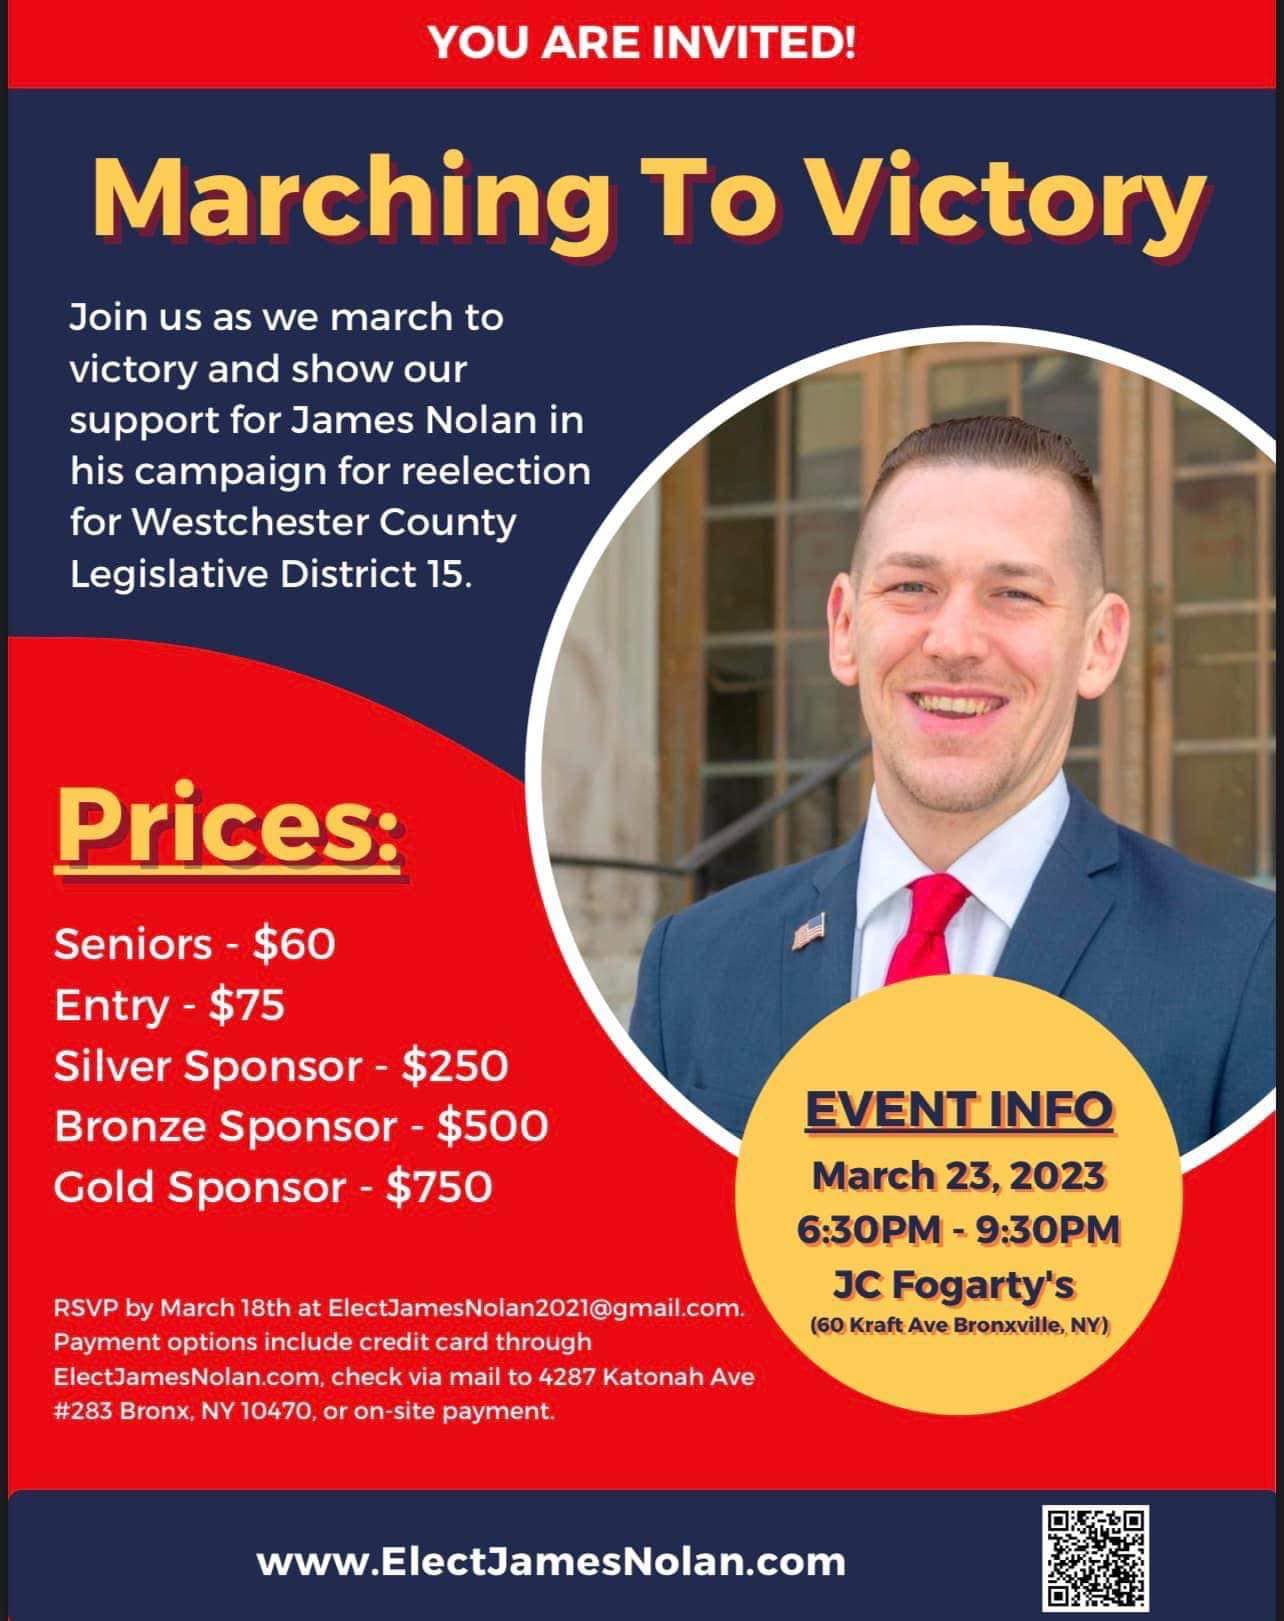 SHOW YOUR SUPPORT: On March 23rd come support Westchester County Legislator James Nolan’s March To Victory Fundraiser at JC Fogartys in Bronxville from 6:30 p.m. until 9:30 p.m